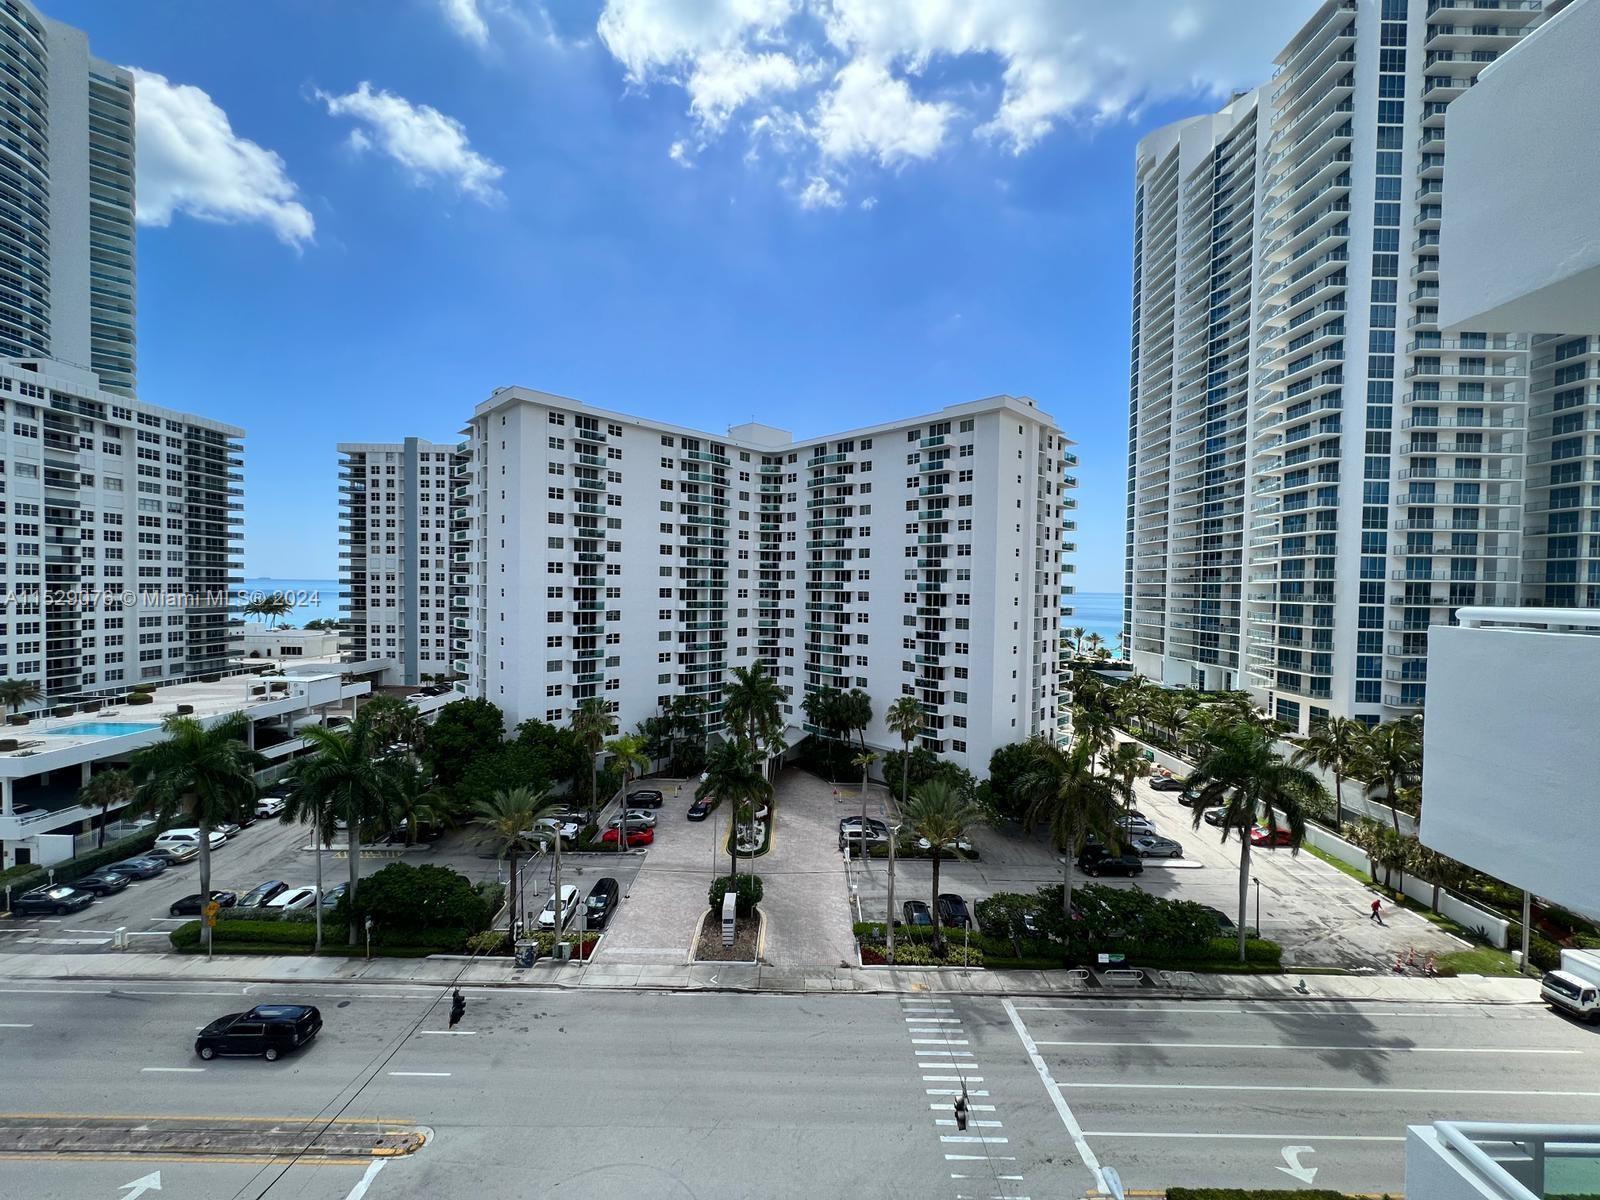 Photo of 3000 S Ocean Dr #814 in Hollywood, FL